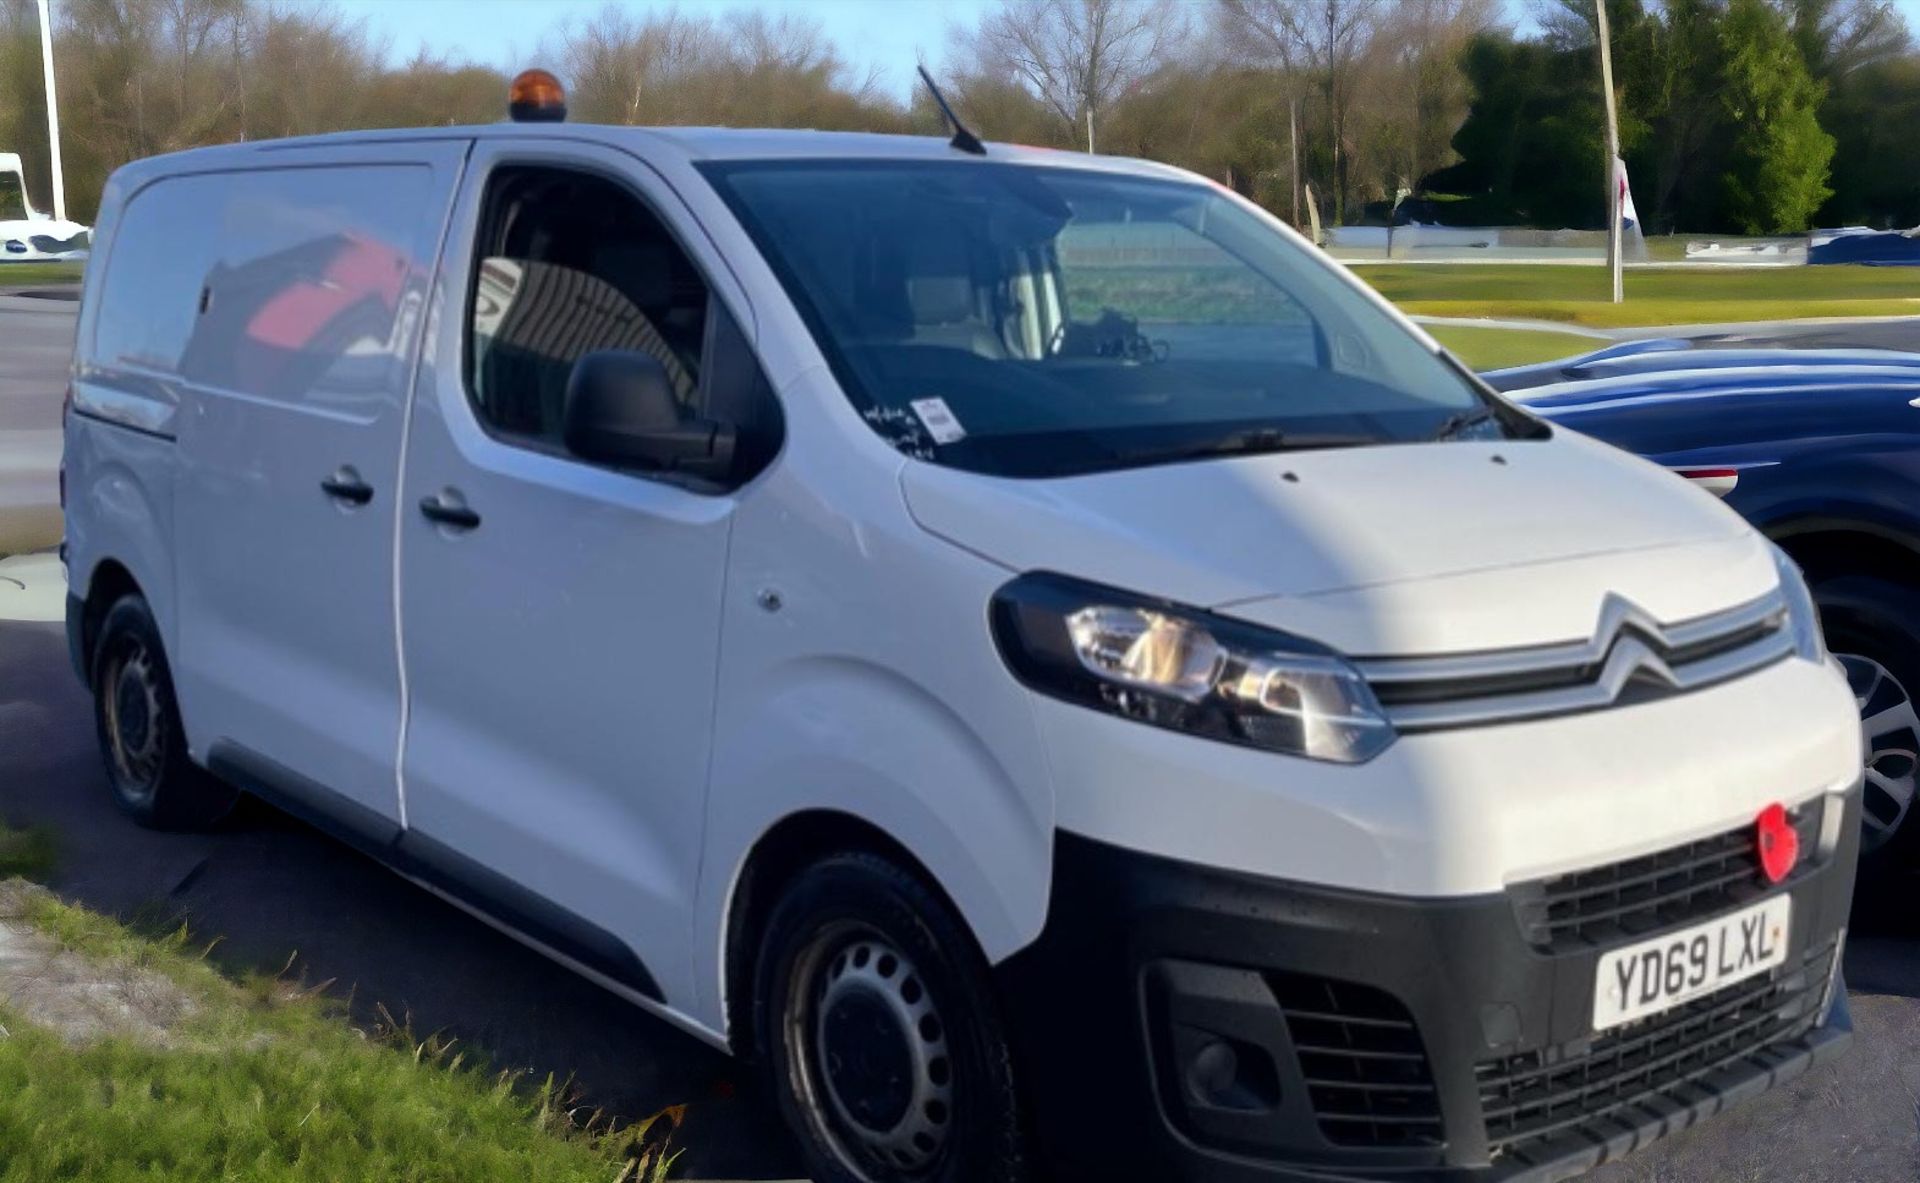 2019-69 REG CITROEN DISPATCH XS 1000 L1H1 - HPI CLEAR - READY TO GO! - Image 5 of 12